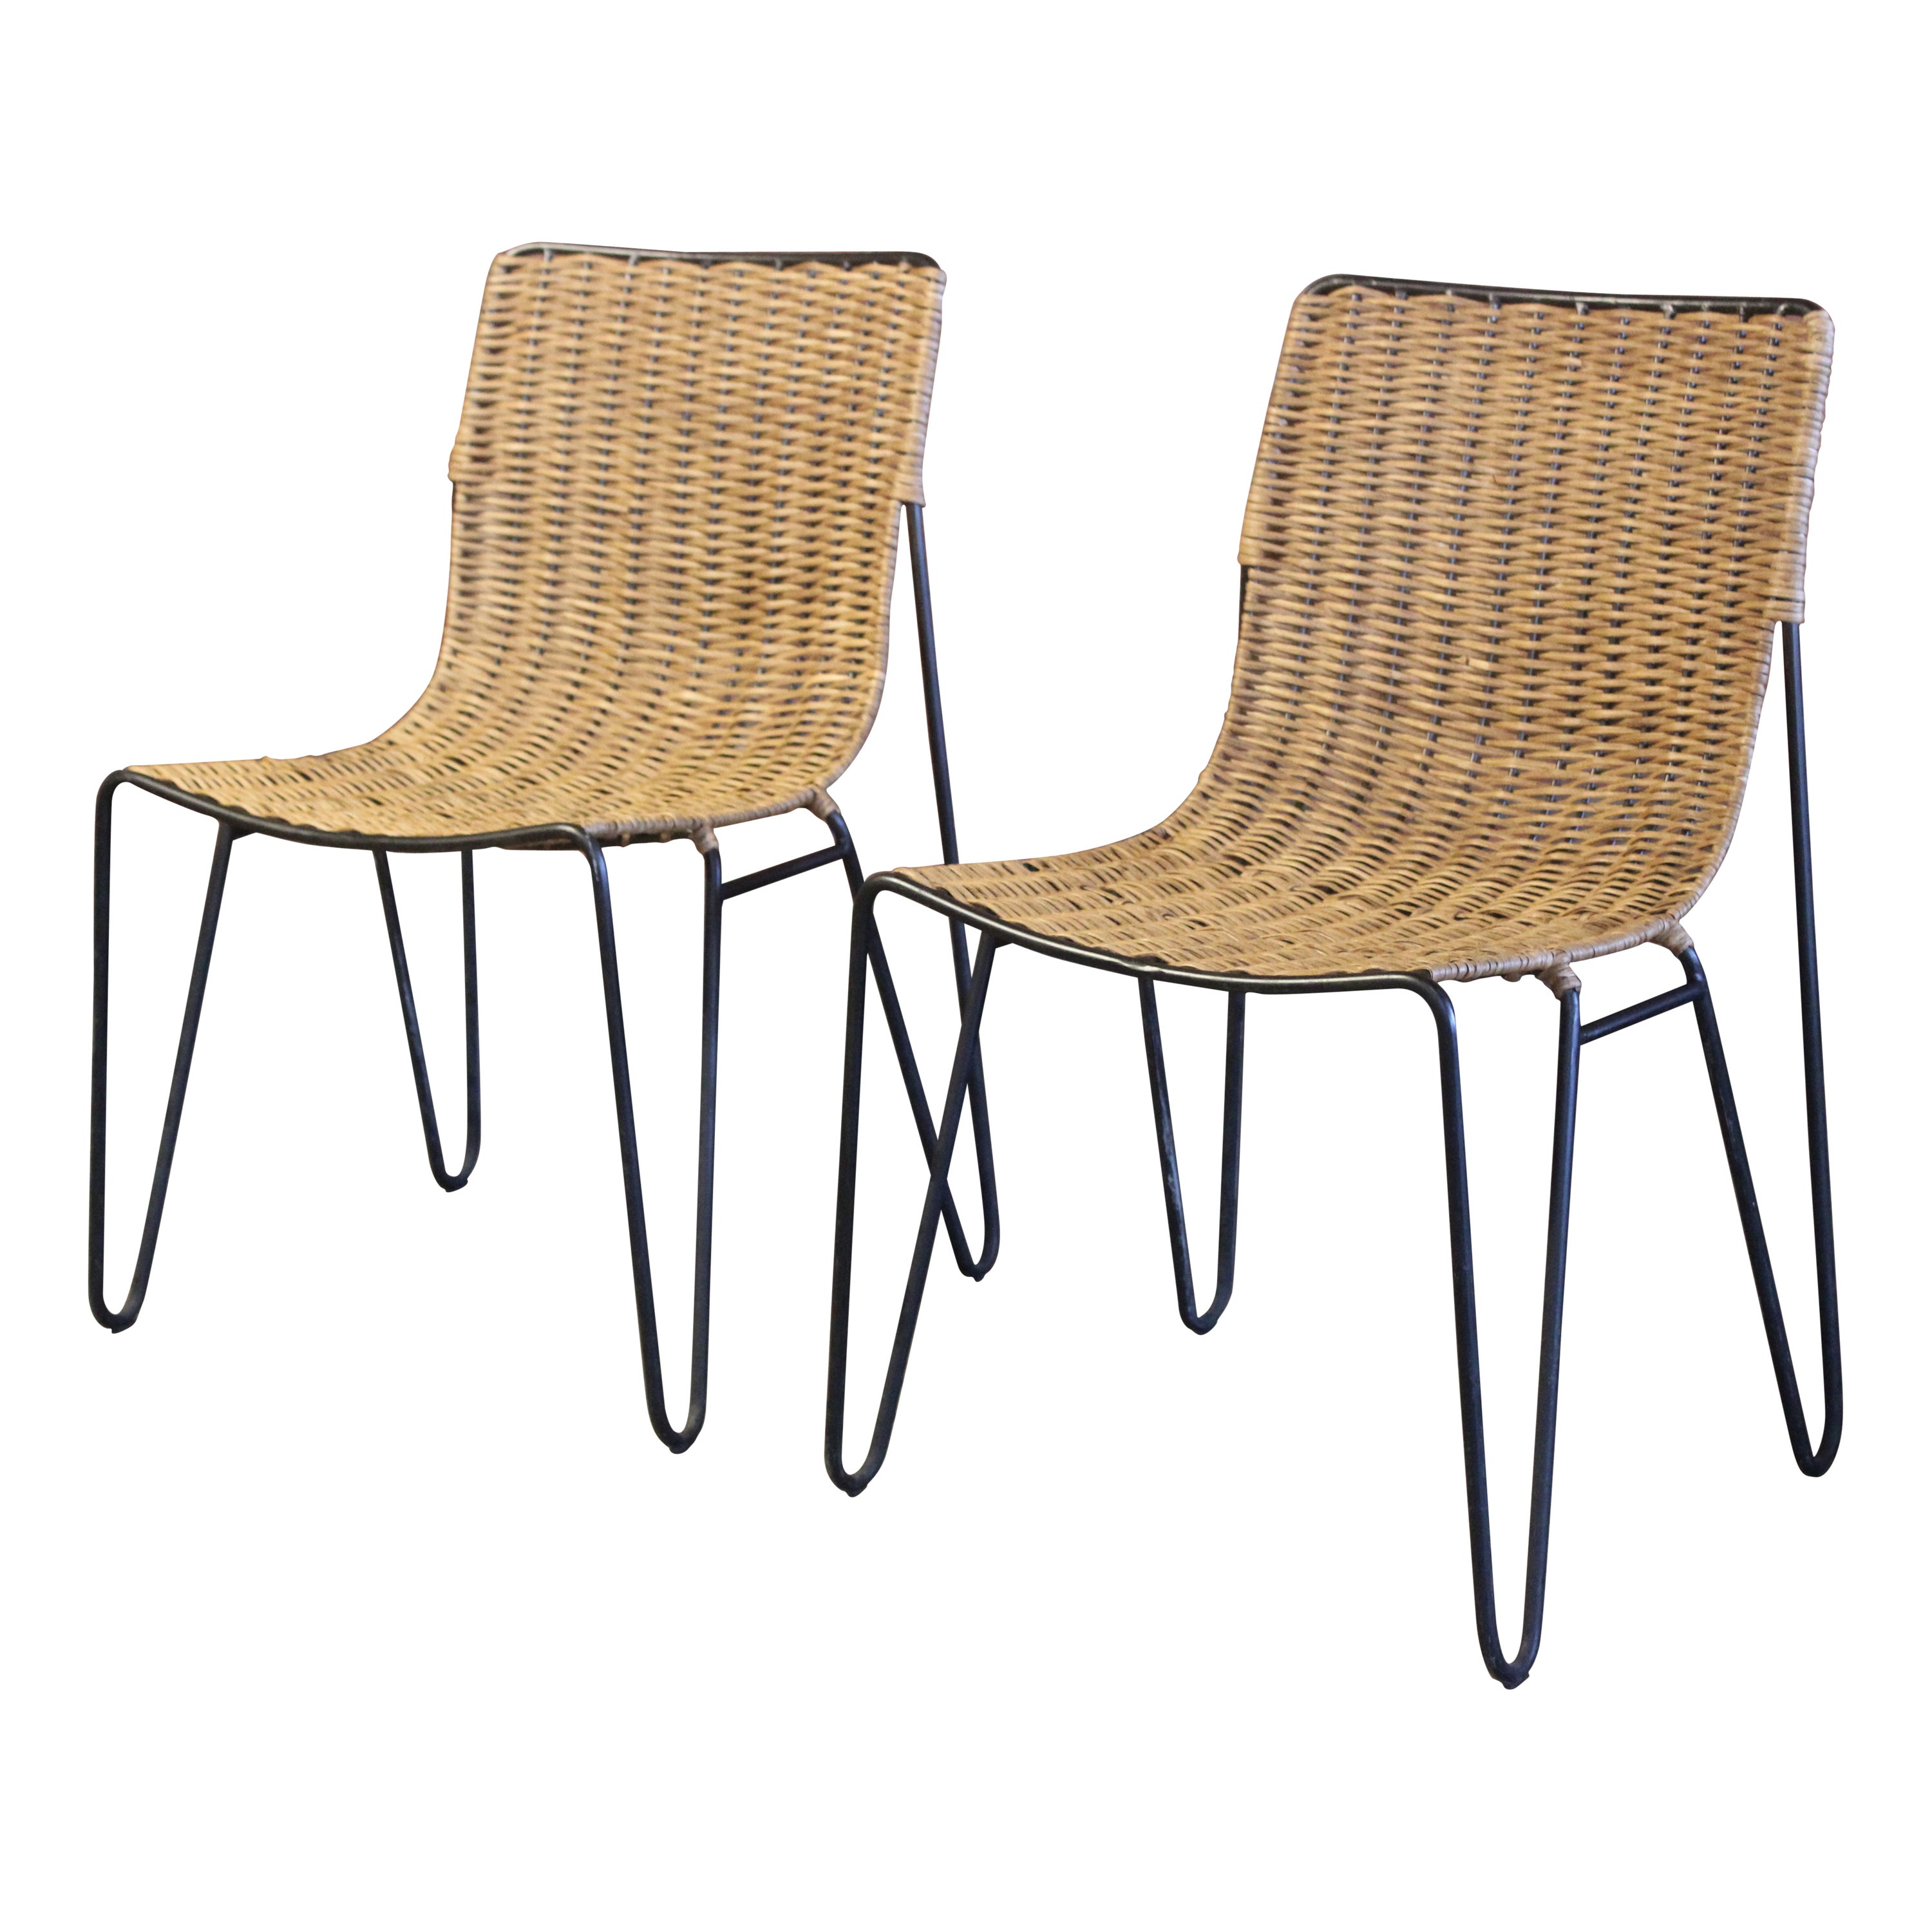 Pair of Wicker and Iron Side Chairs